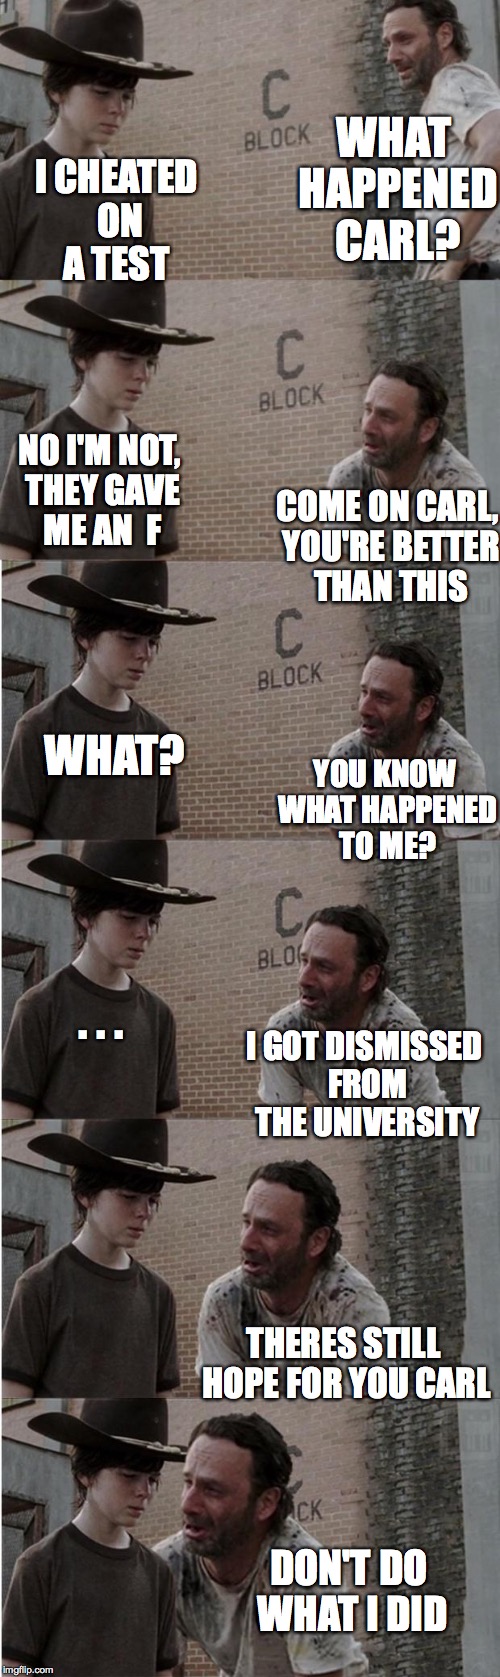 Rick and Carl Longer | I CHEATED ON A TEST; WHAT HAPPENED CARL? NO I'M NOT, THEY GAVE ME AN  F; COME ON CARL, YOU'RE BETTER THAN THIS; WHAT? YOU KNOW WHAT HAPPENED TO ME? . . . I GOT DISMISSED FROM THE UNIVERSITY; THERES STILL HOPE FOR YOU CARL; DON'T DO WHAT I DID | image tagged in memes,rick and carl longer | made w/ Imgflip meme maker